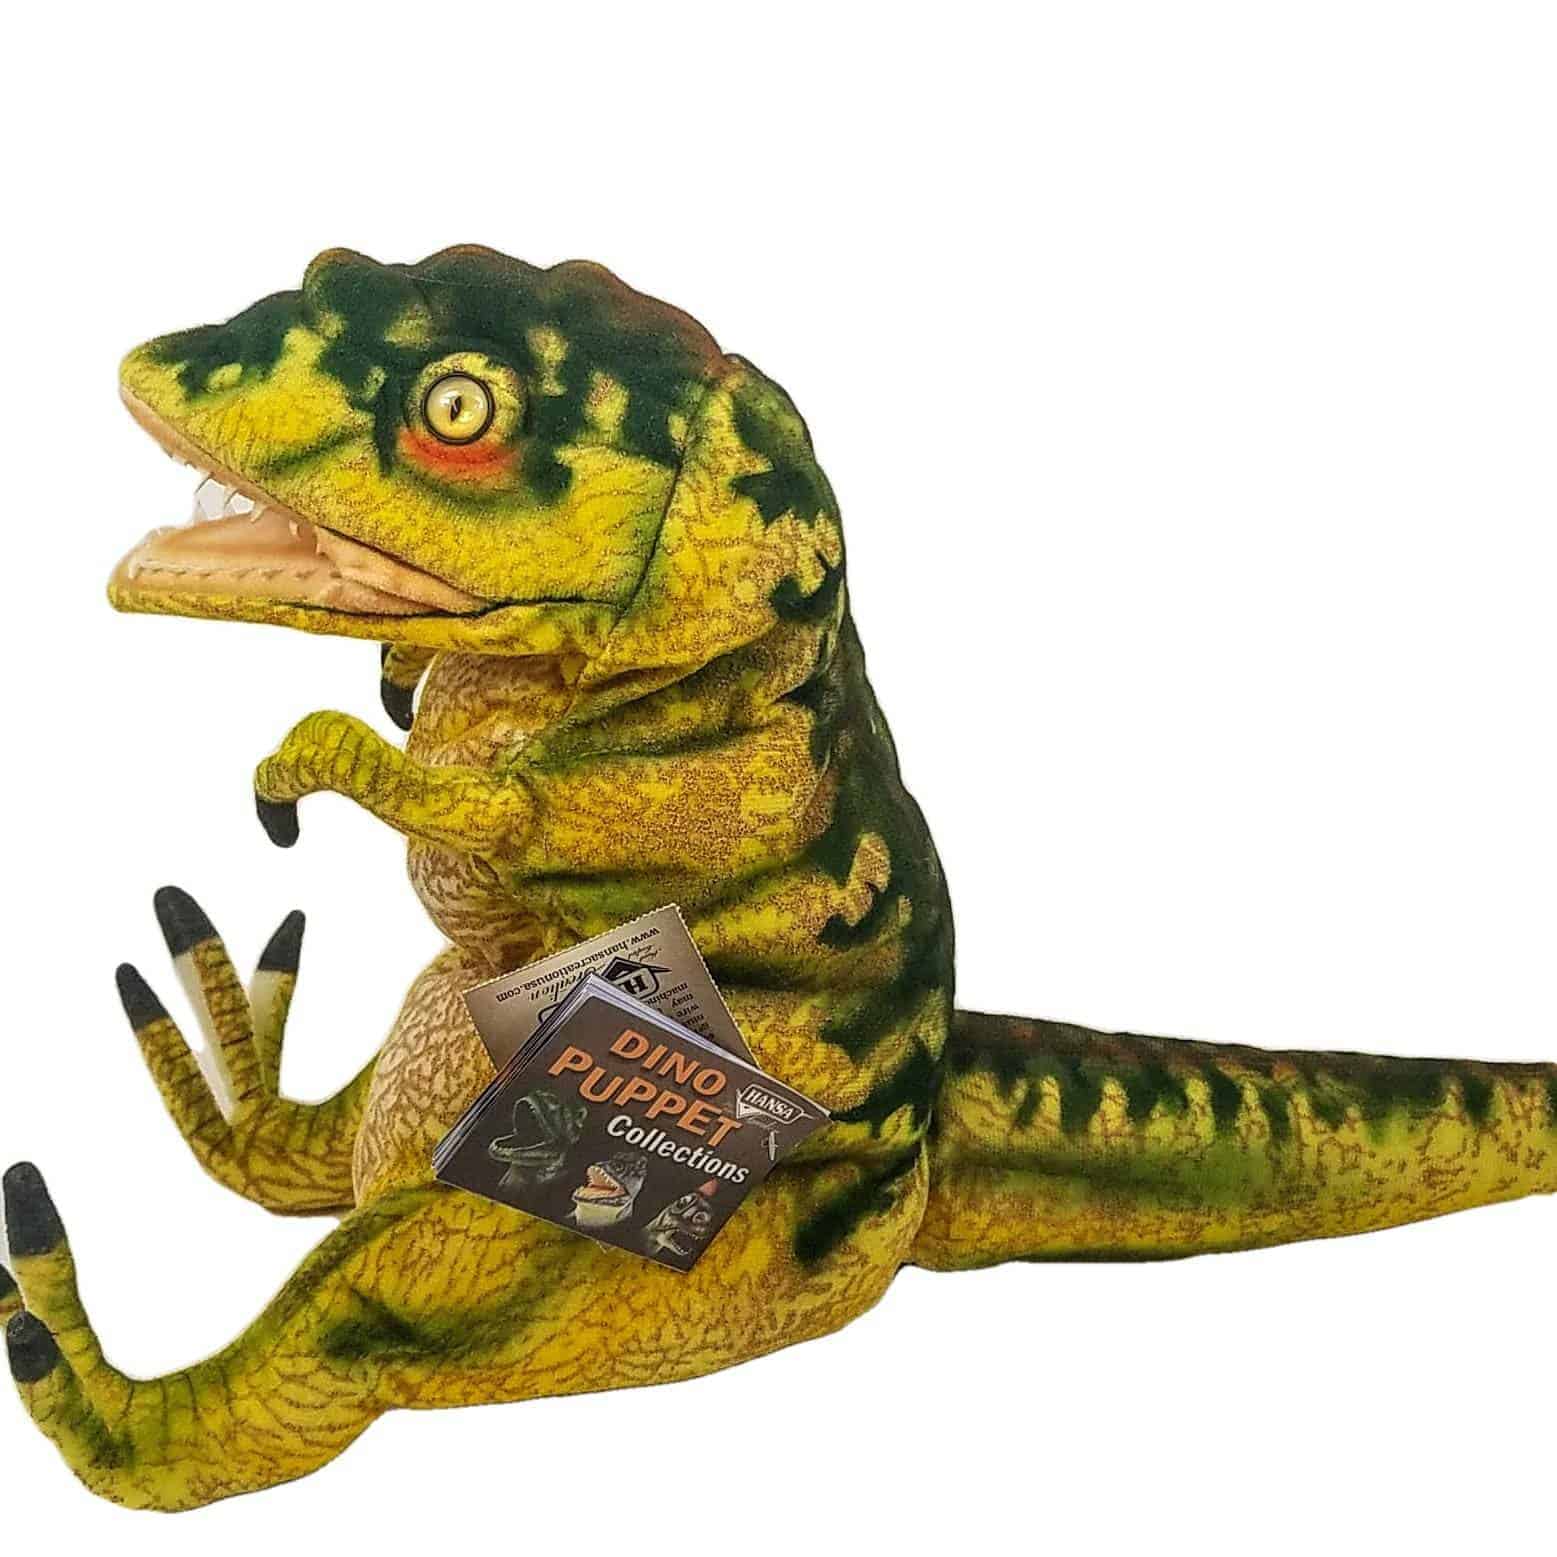 This T Rex Dinosaur Hand Puppet by Hansa True to Life Looking Plush Learning Toy is made with love by Premier Homegoods! Shop more unique gift ideas today with Spots Initiatives, the best way to support creators.